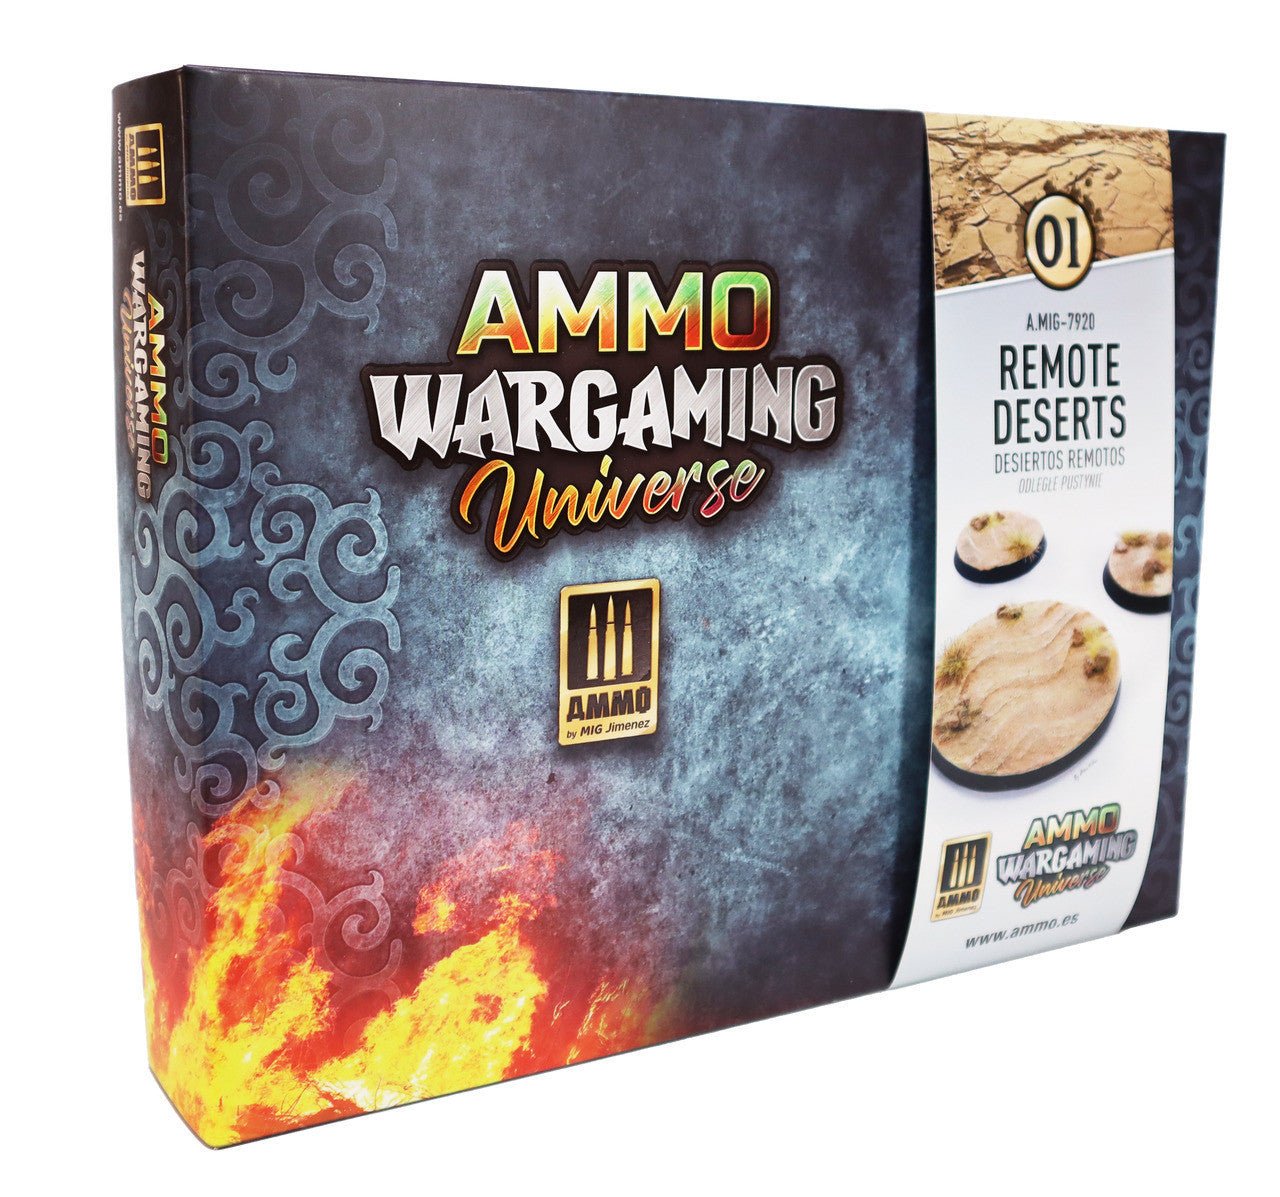 Discounted AMMO WARGAMING UNIVERSE 01 - Remote Deserts  discAMIG7920 AMMO by Mig Jimenez